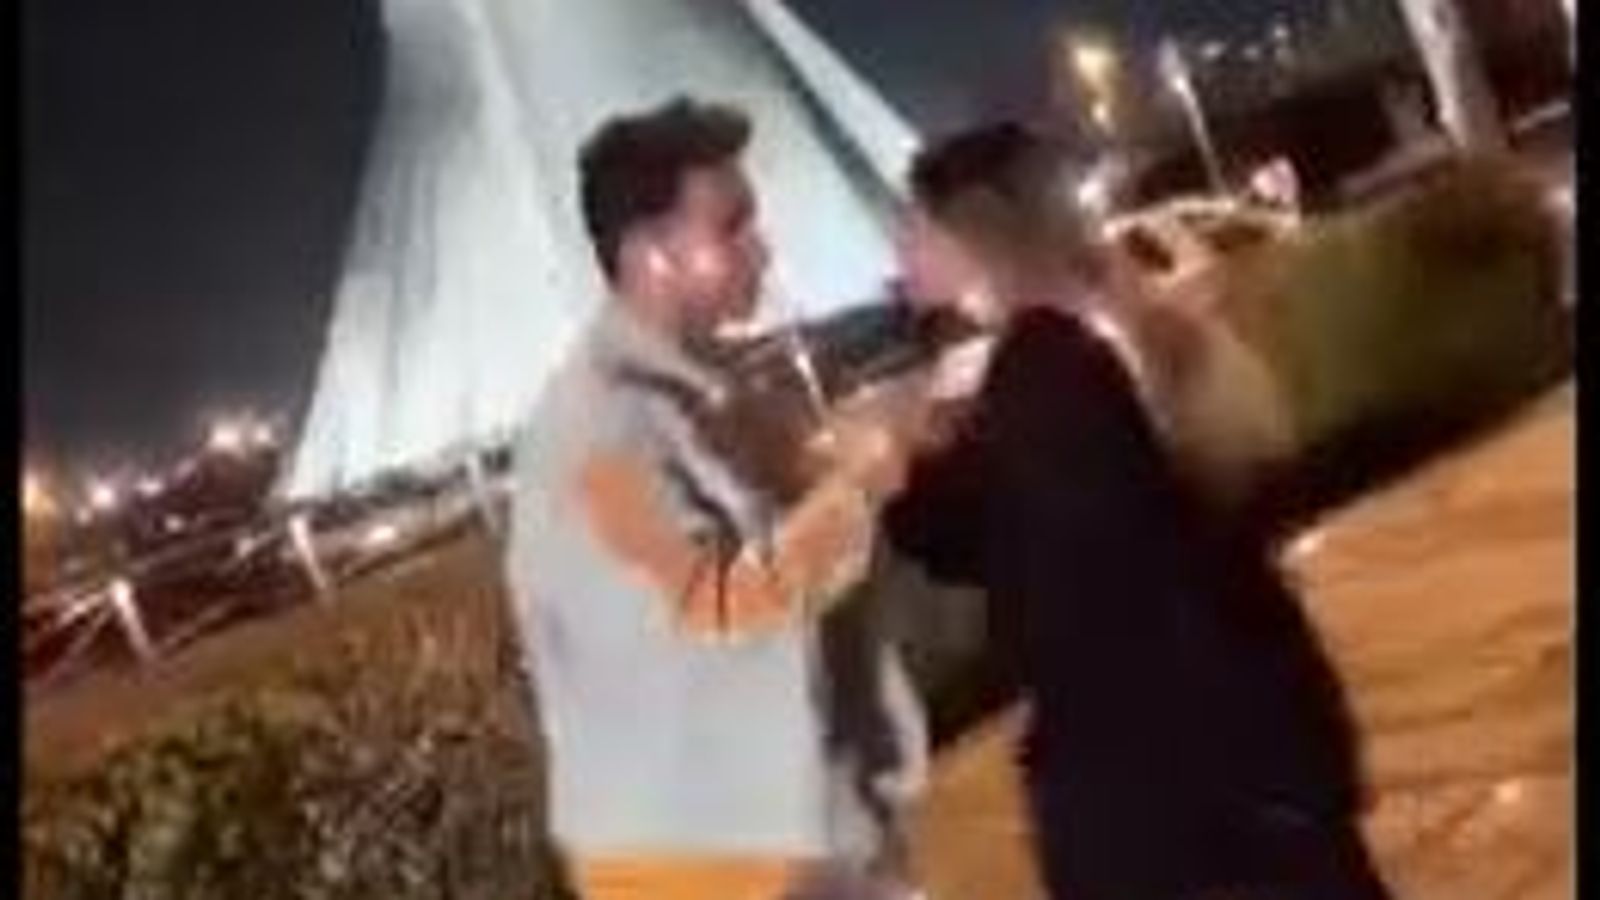 Iran: Couple jailed for 10 years over viral video showing them dancing at Tehran landmark